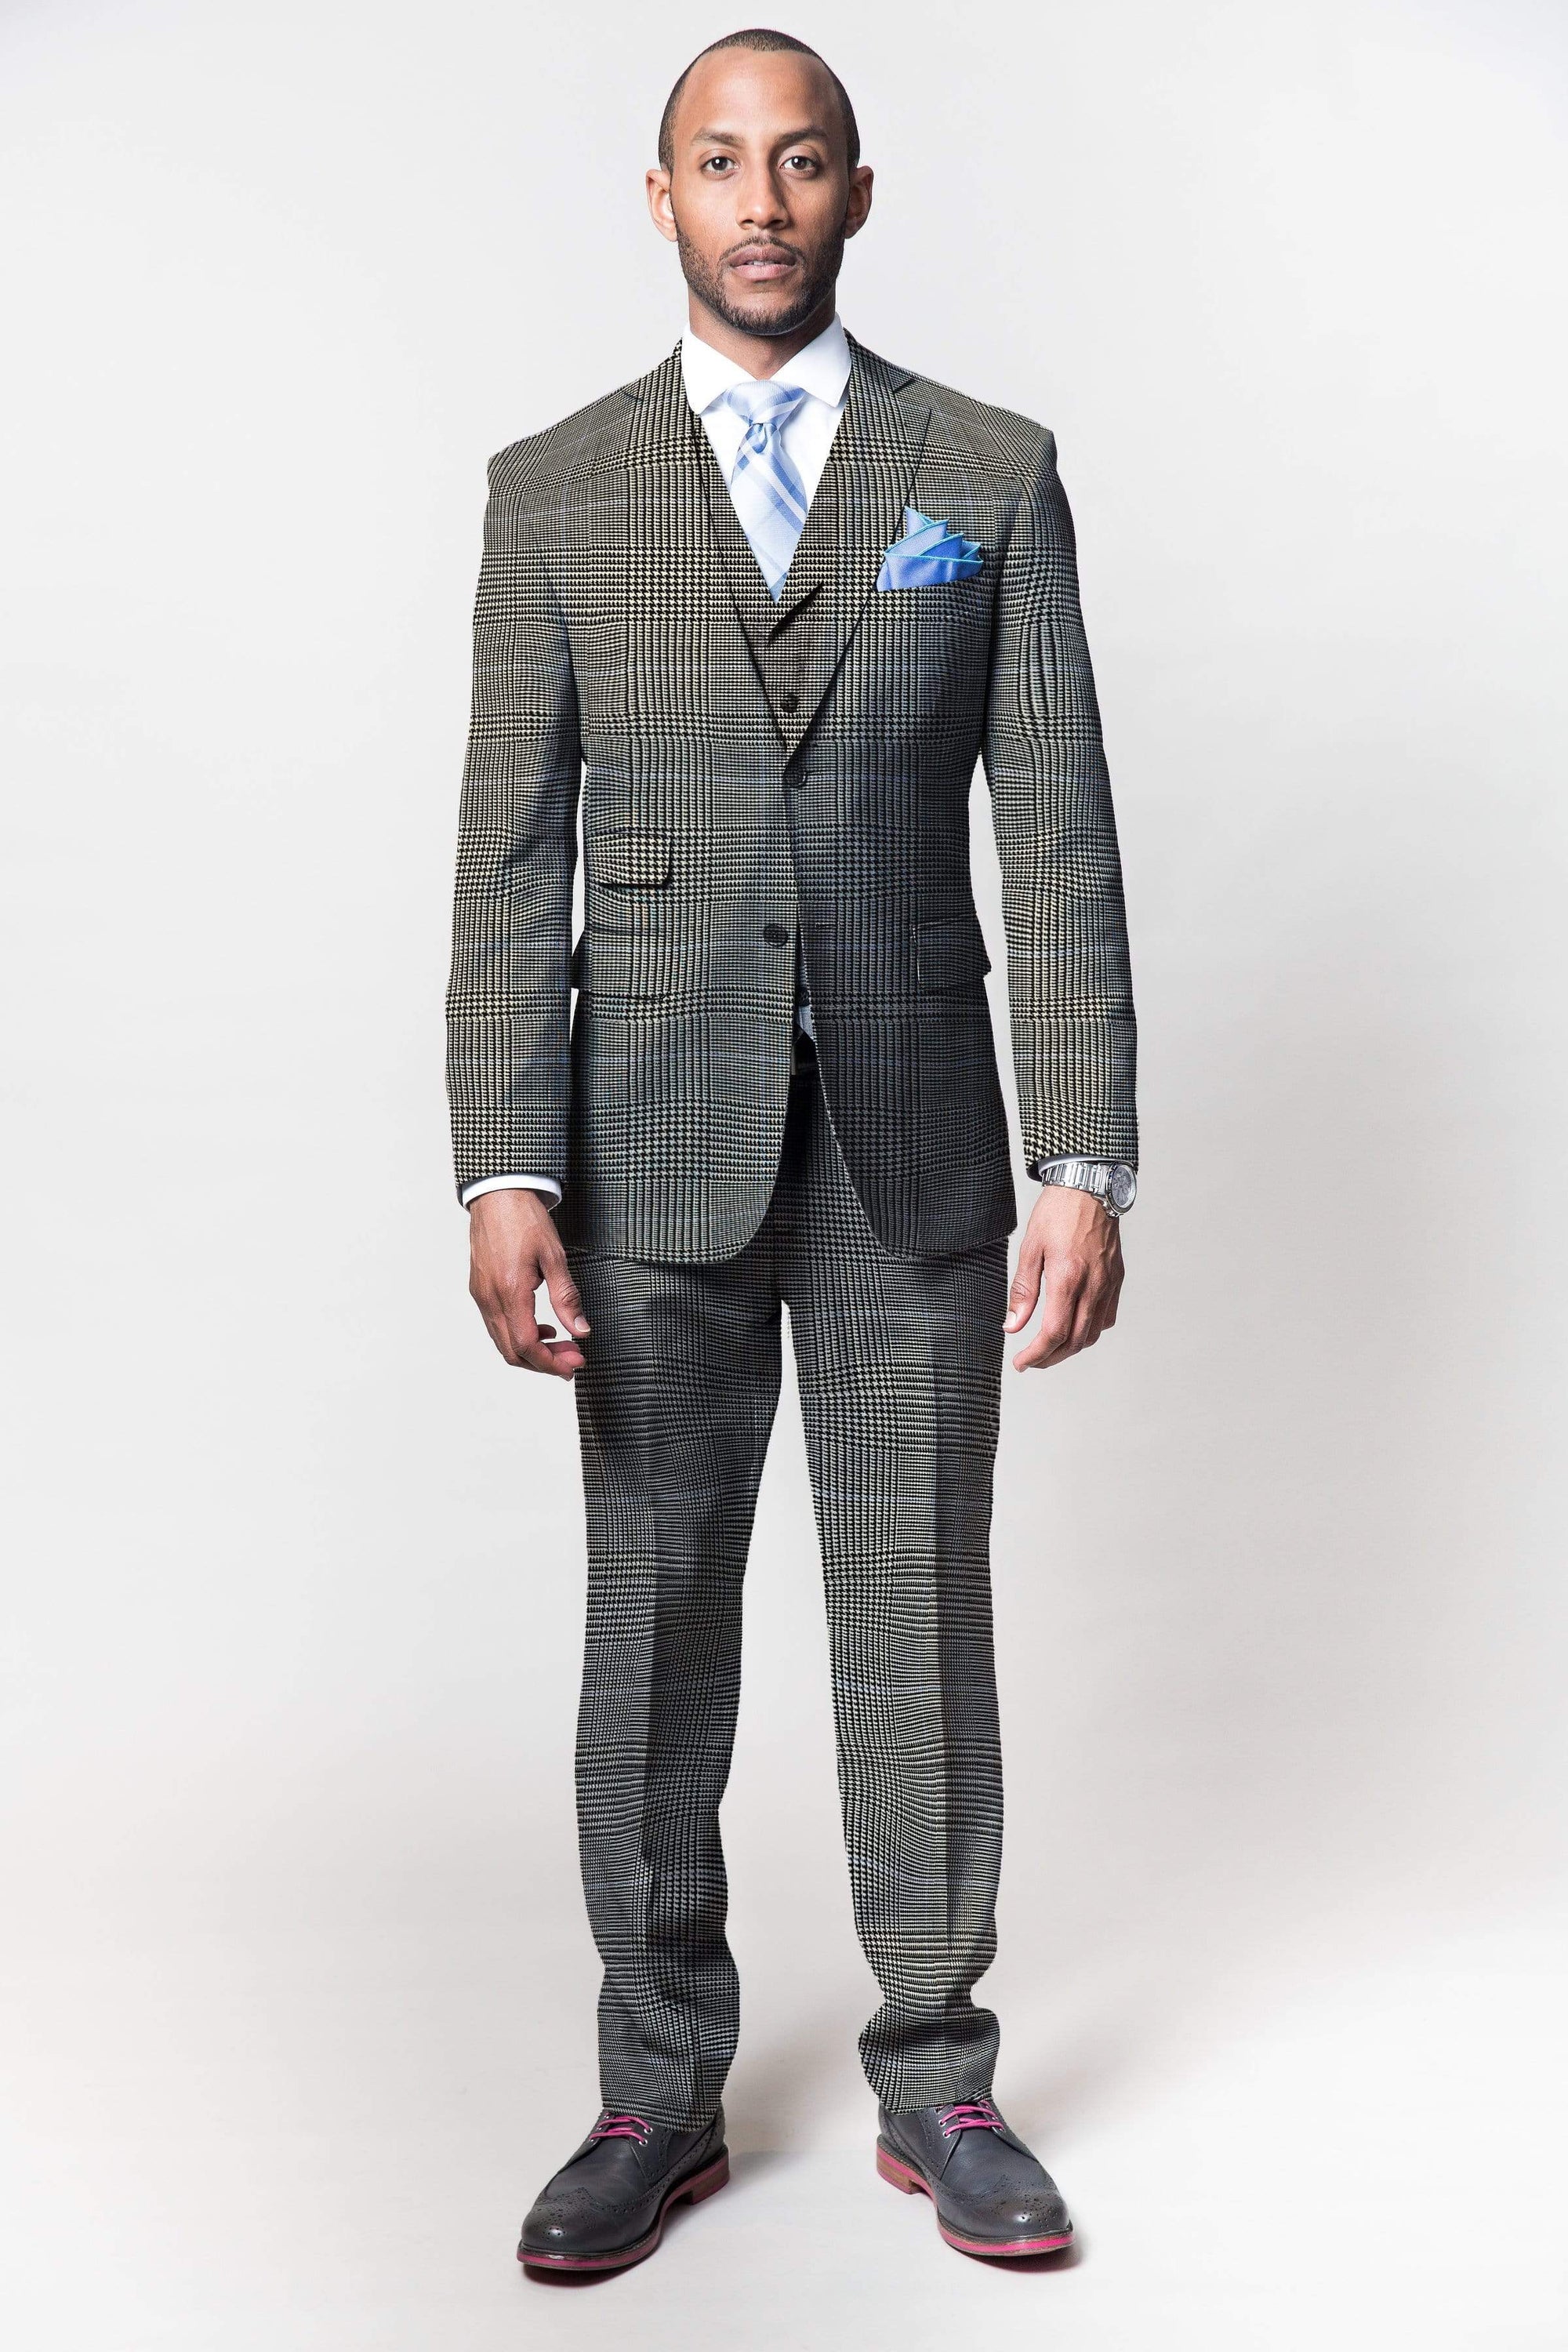 MEN'S 2 PIECE BESPOKE SUIT | LINGO LUXE GREY PRINCE OF WALES WITH BABY CHECK-Lingo Luxe Bespoke